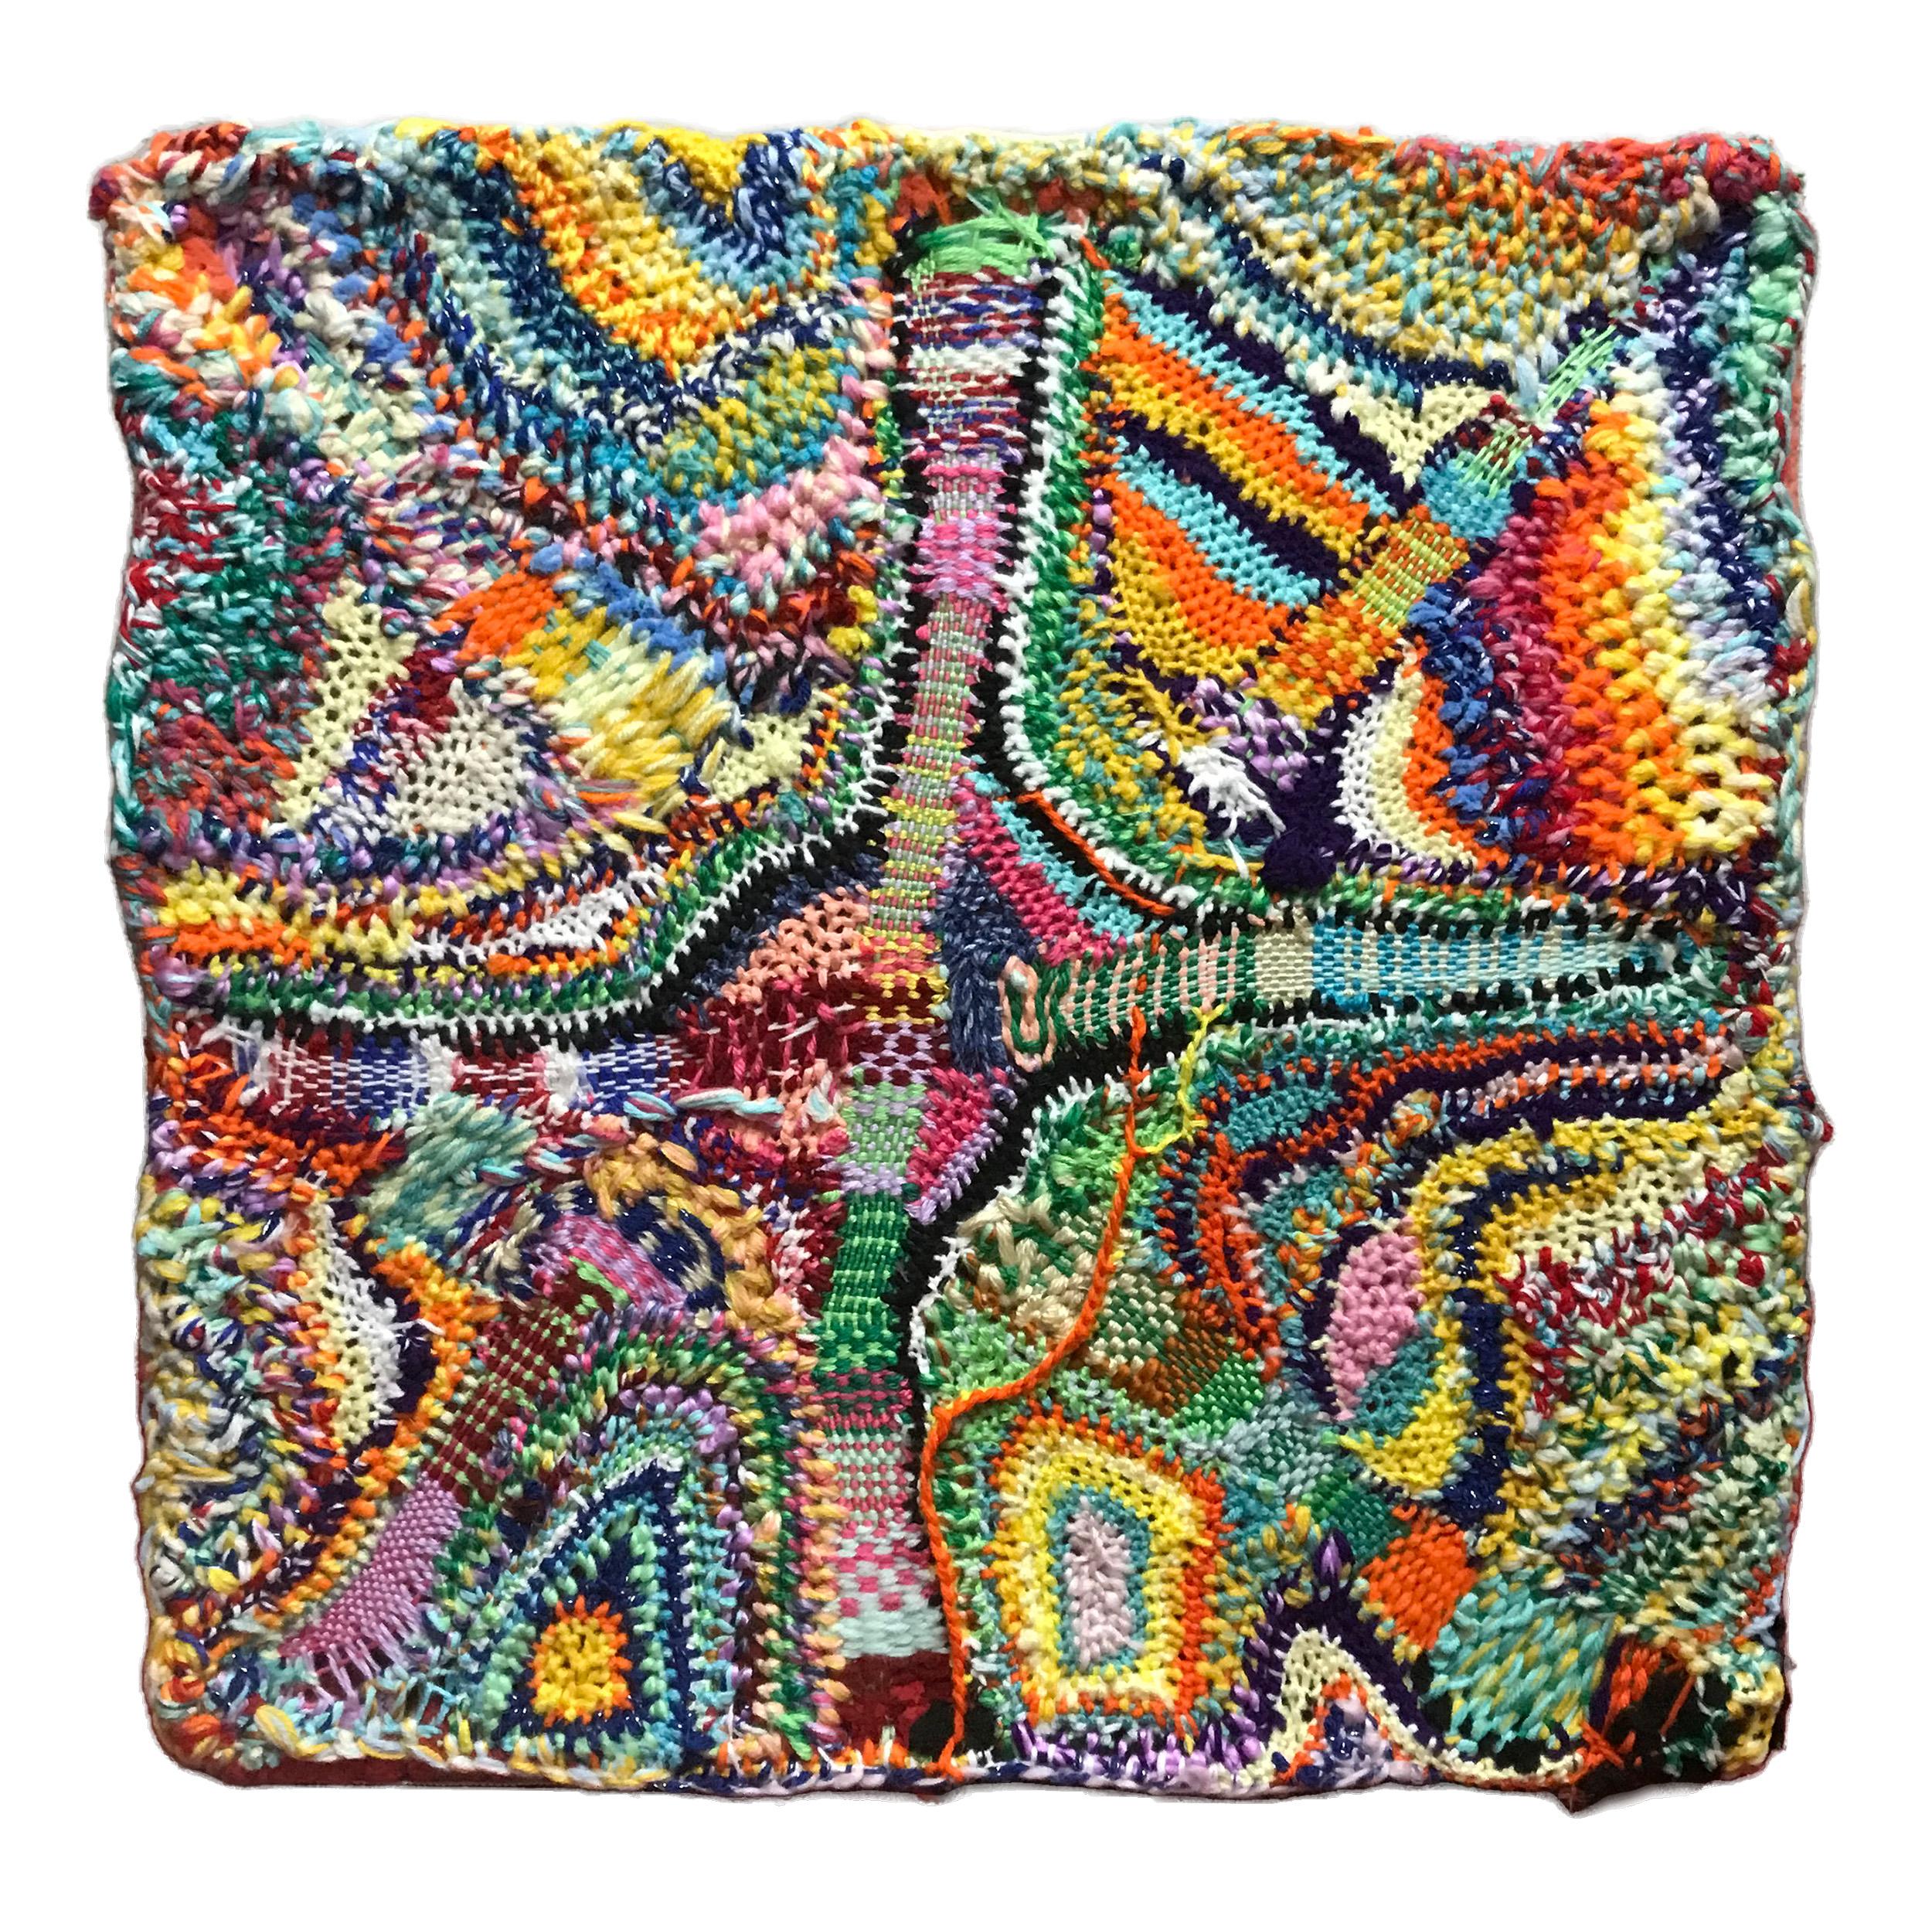 "Glossolalia", Contemporary, Woven, Fiber, Wall Hanging, Stretched, Abstract